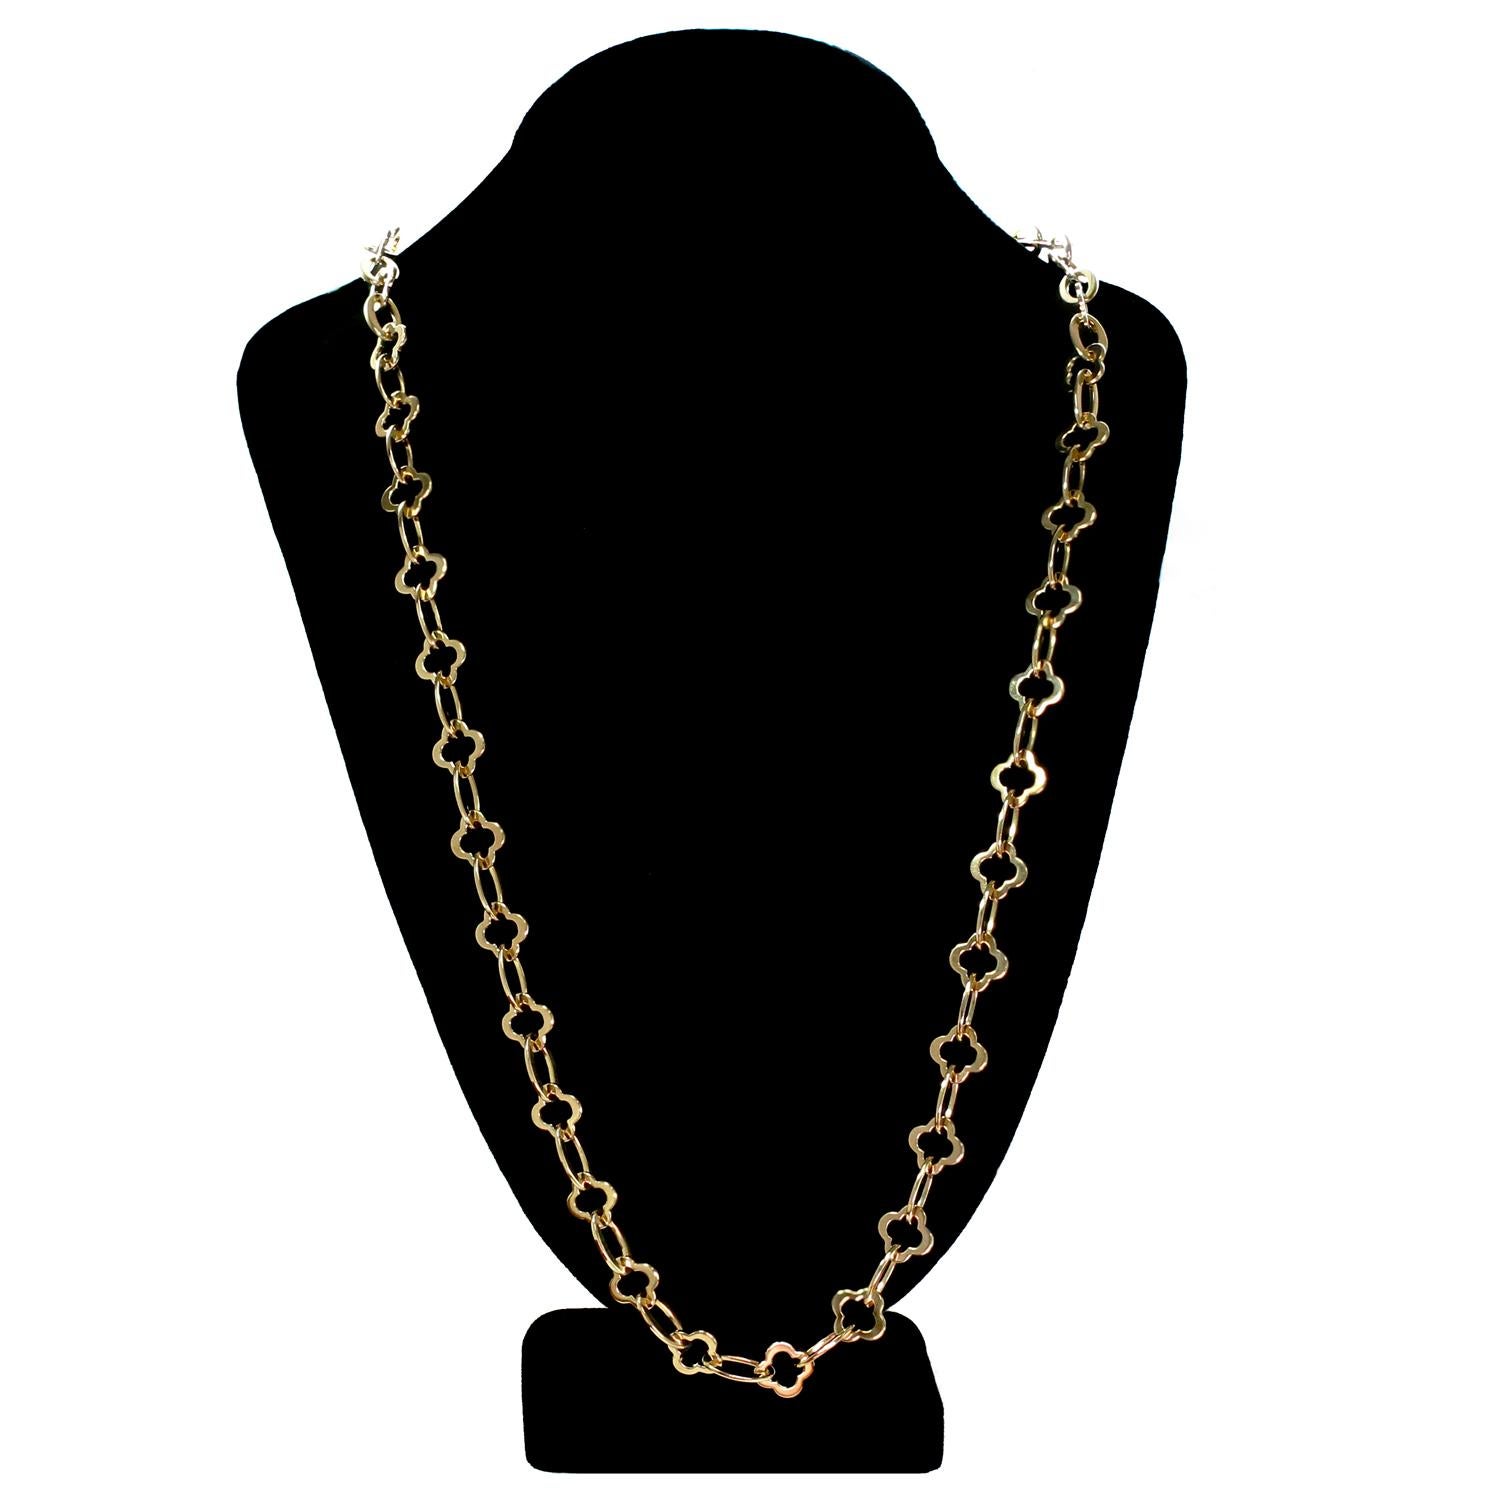 Women's Van Cleef & Arpels Byzantine Alhambra Yellow Gold Long Chain Necklace